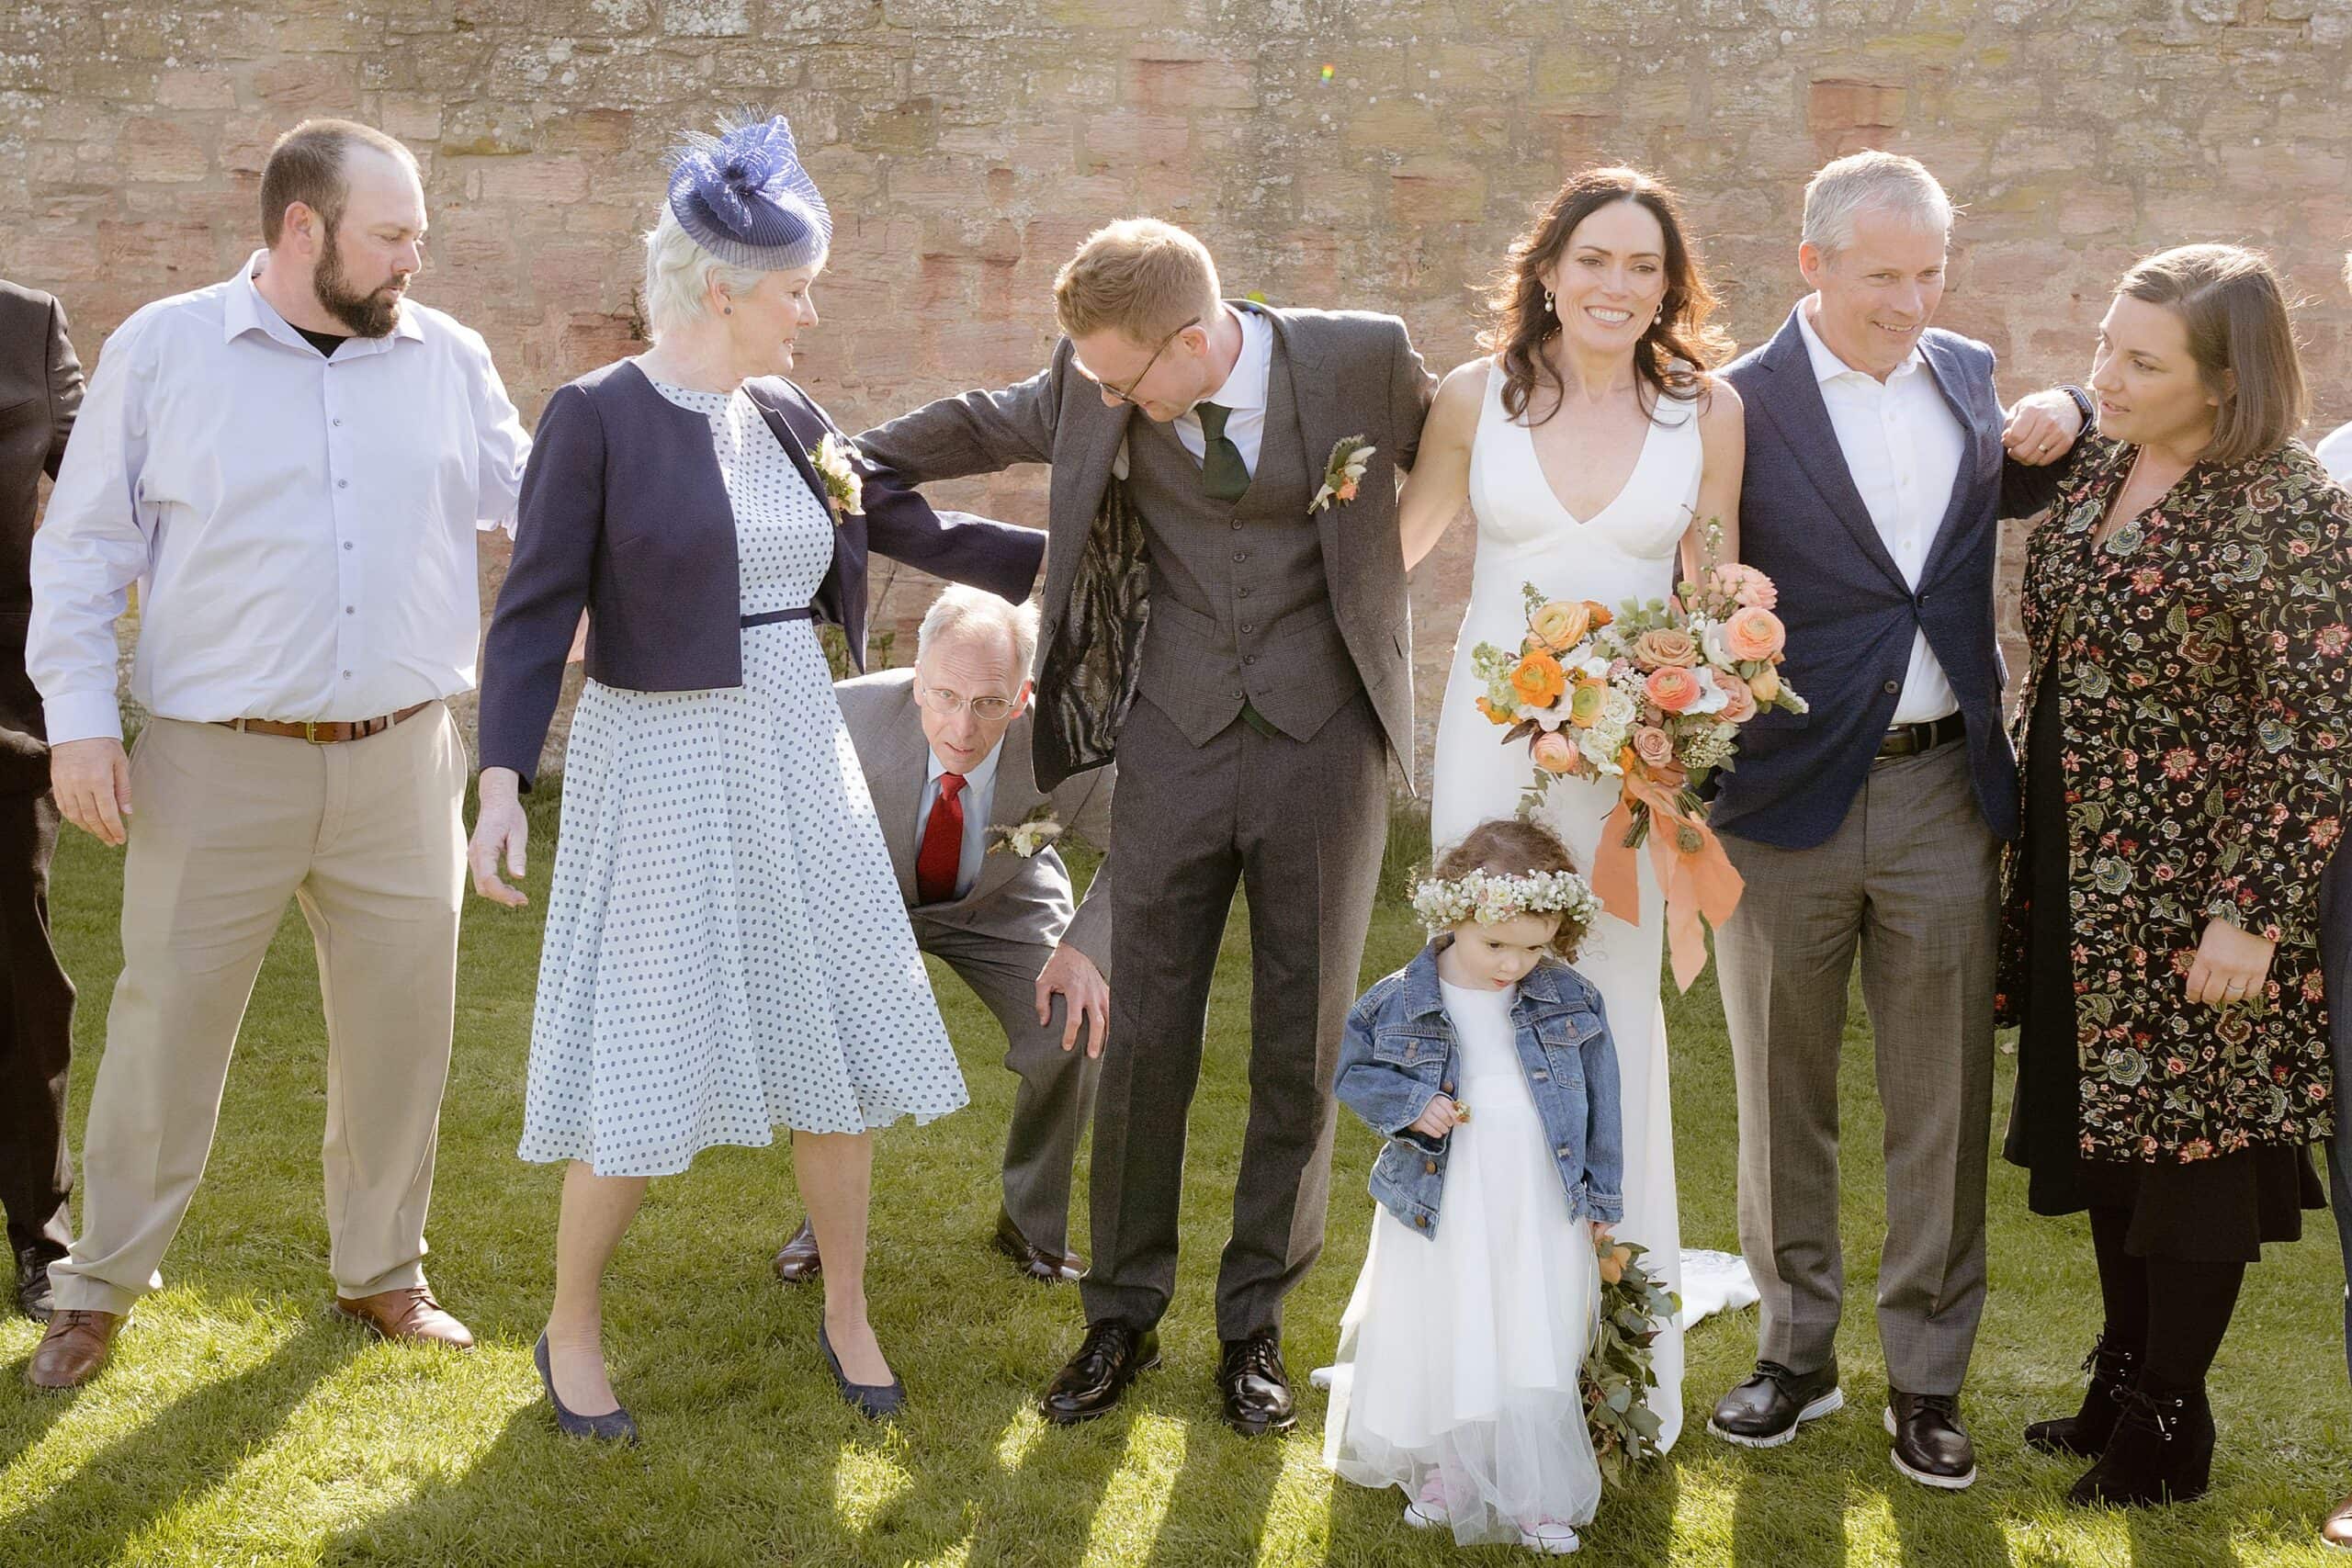 documentary shot of the bride and groom and guests following their joyful wedding at an outdoor wedding venue